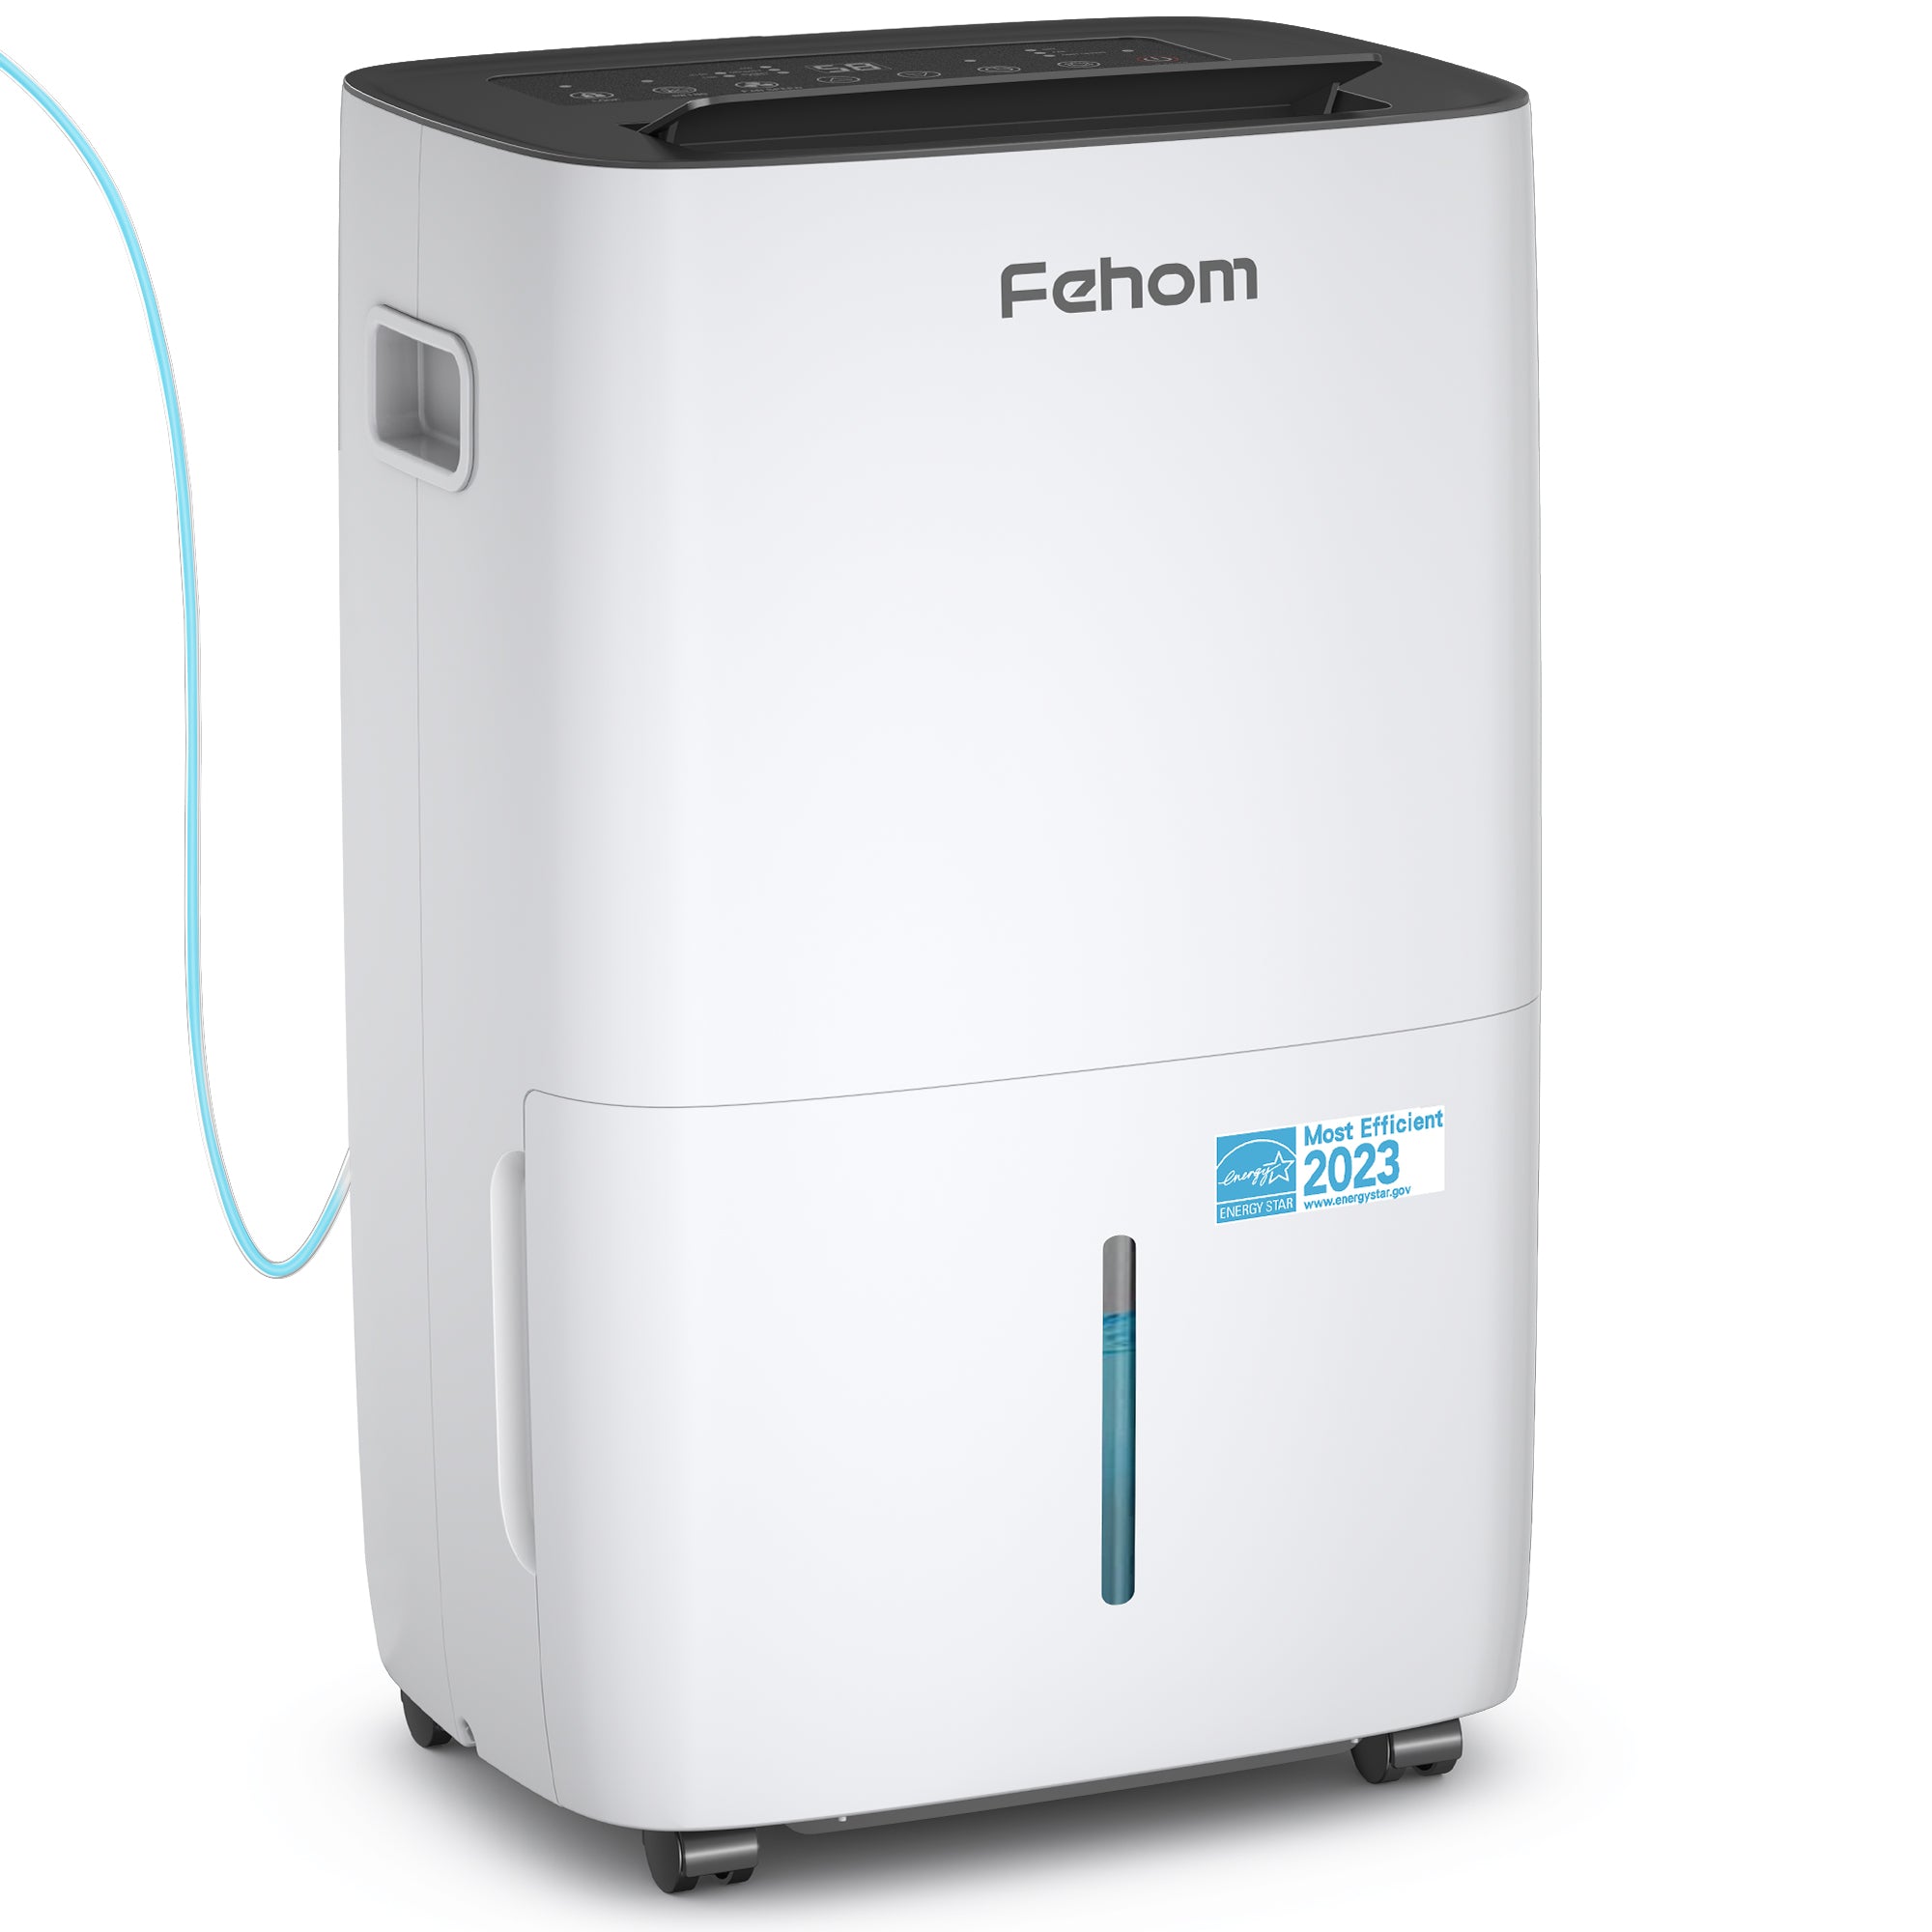 Fehom 150 Pints Dehumidifier with Pump Most Efficient 2023 Energy 